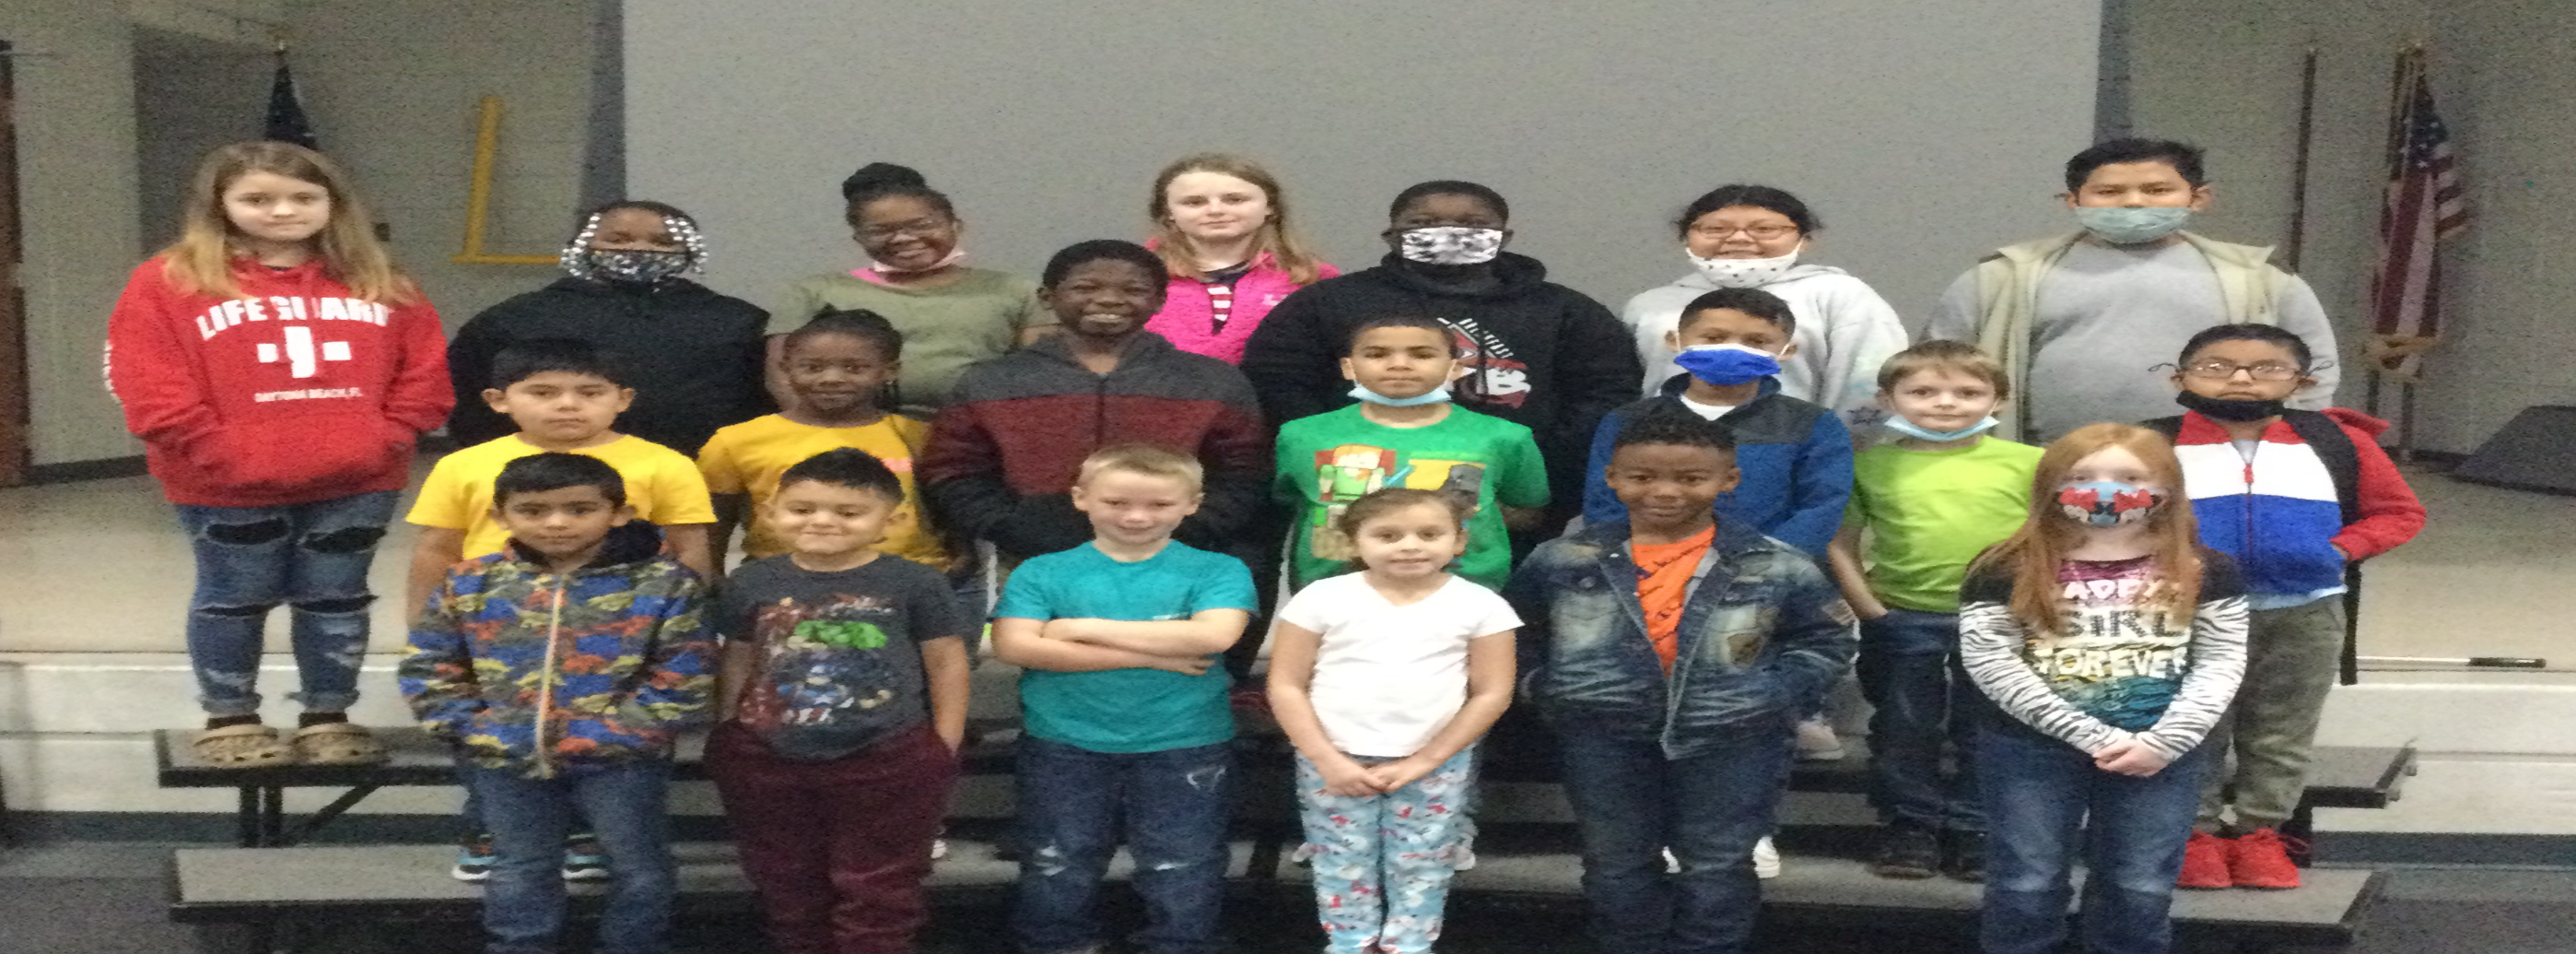 PBIS Students of the Month-November/December